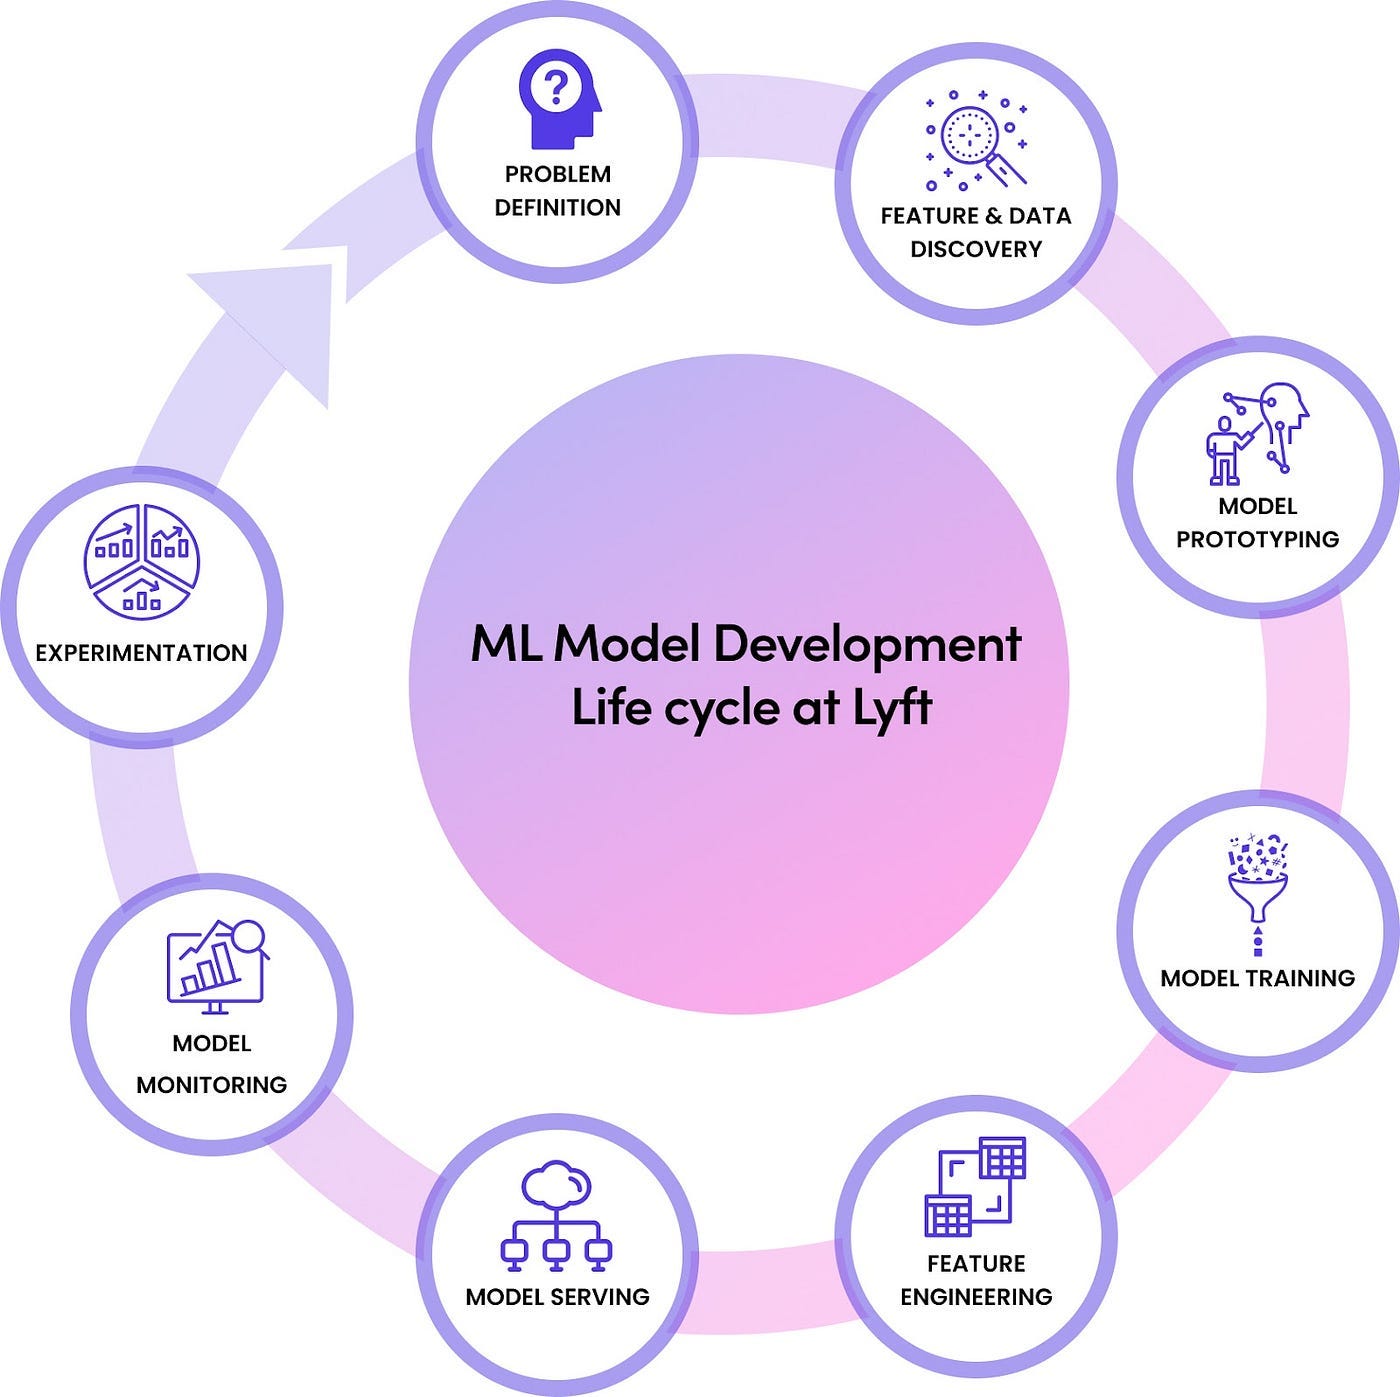 The steps of the ML Model Development Life Cycle at Lyft.